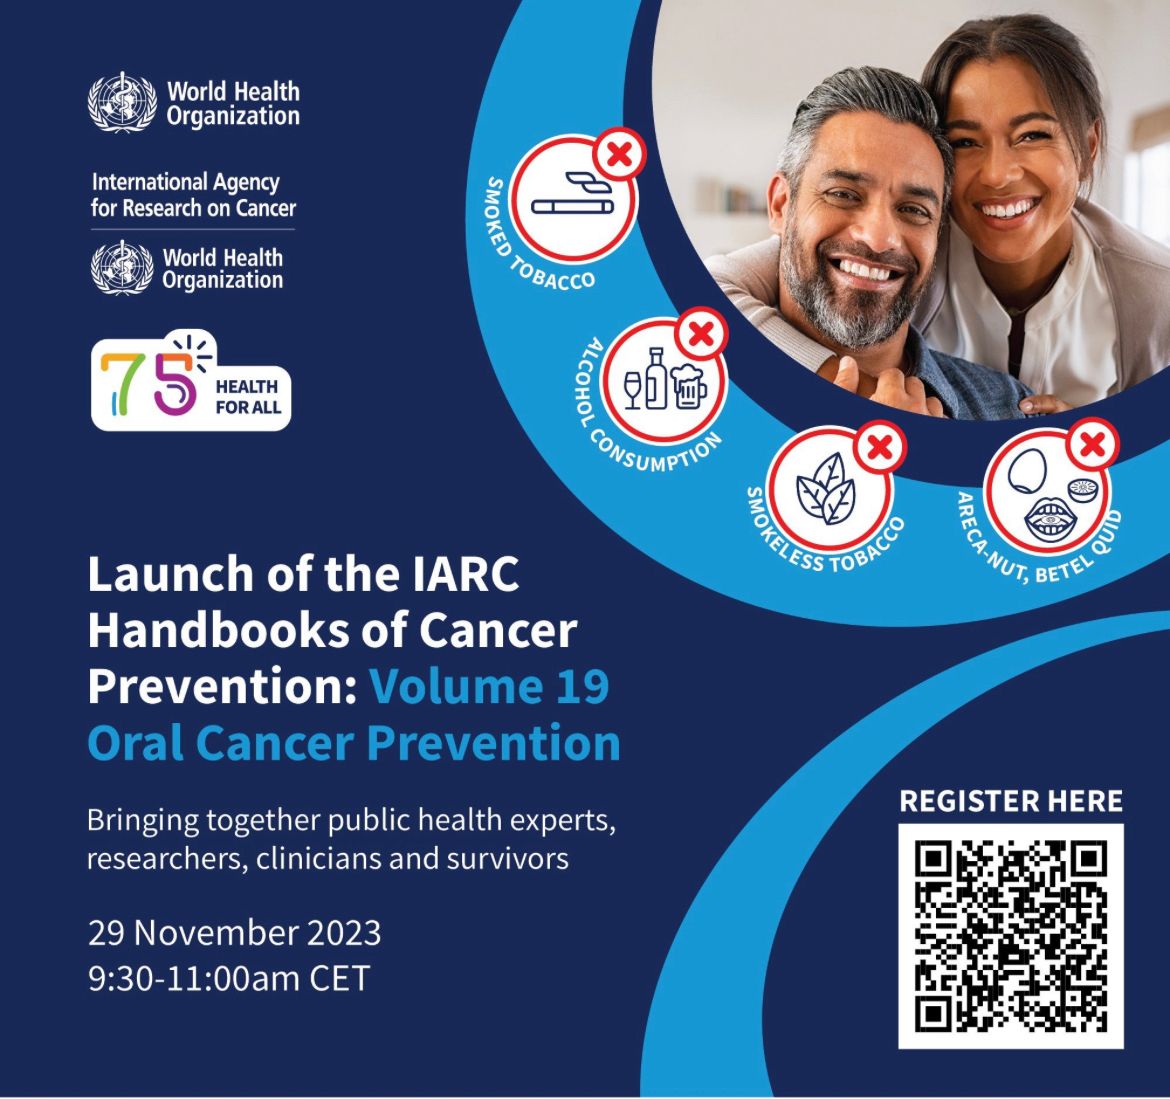 Felipe Roitberg: Don’t miss the launch of the IARC Handbooks on Cancer Prevention: Volume 19 Oral Cancer Prevention